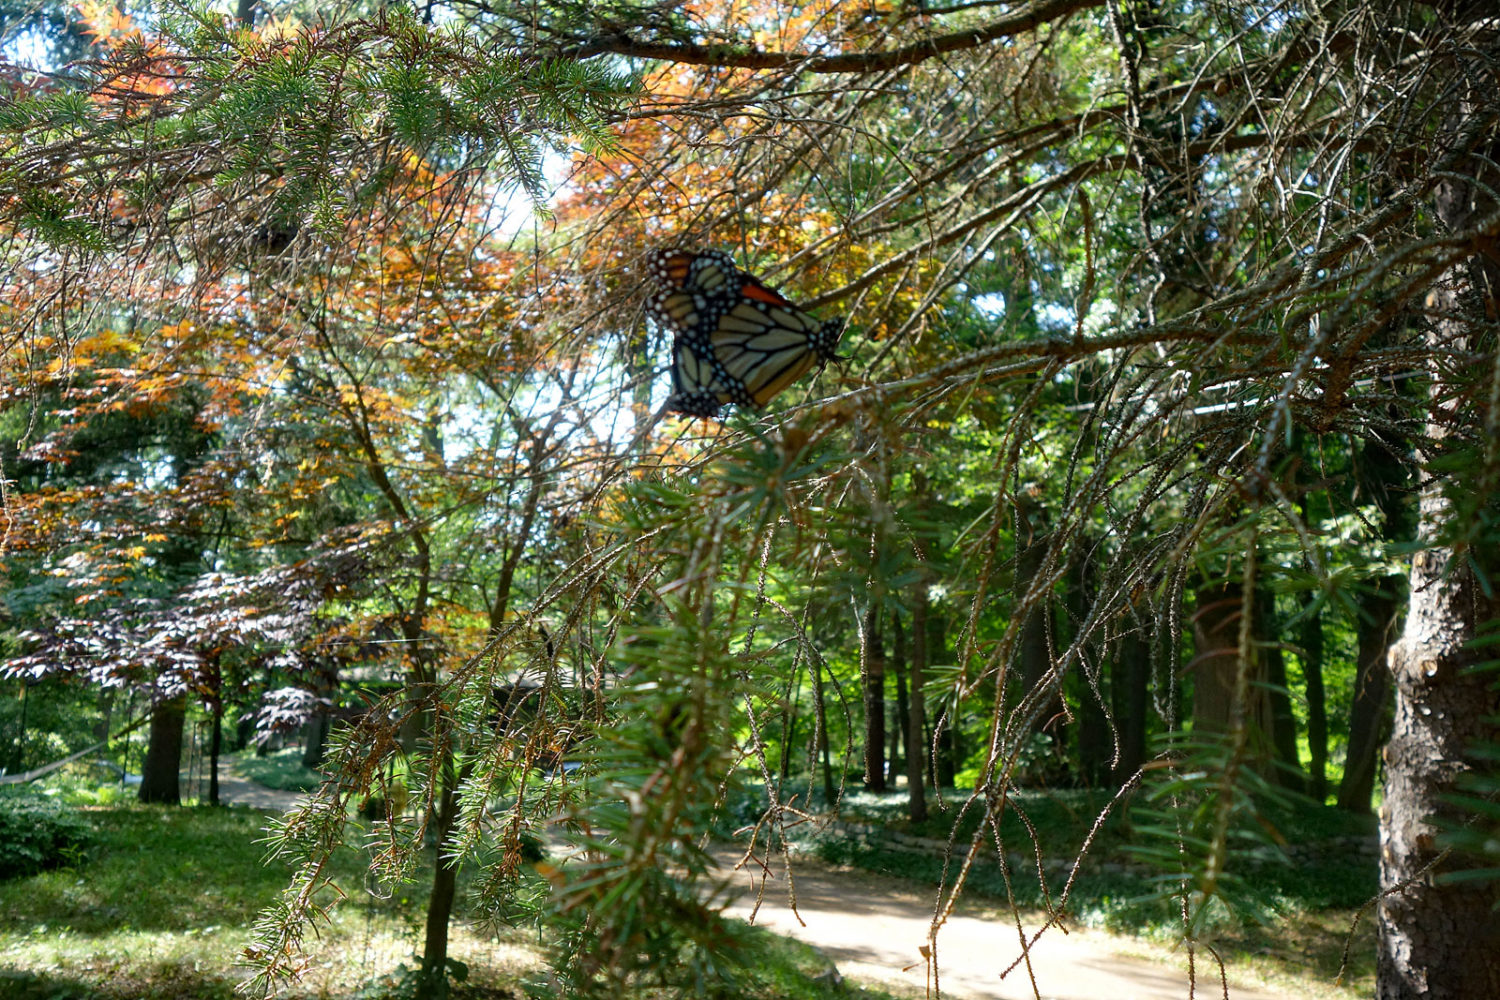 Two Monarch butterflies mating